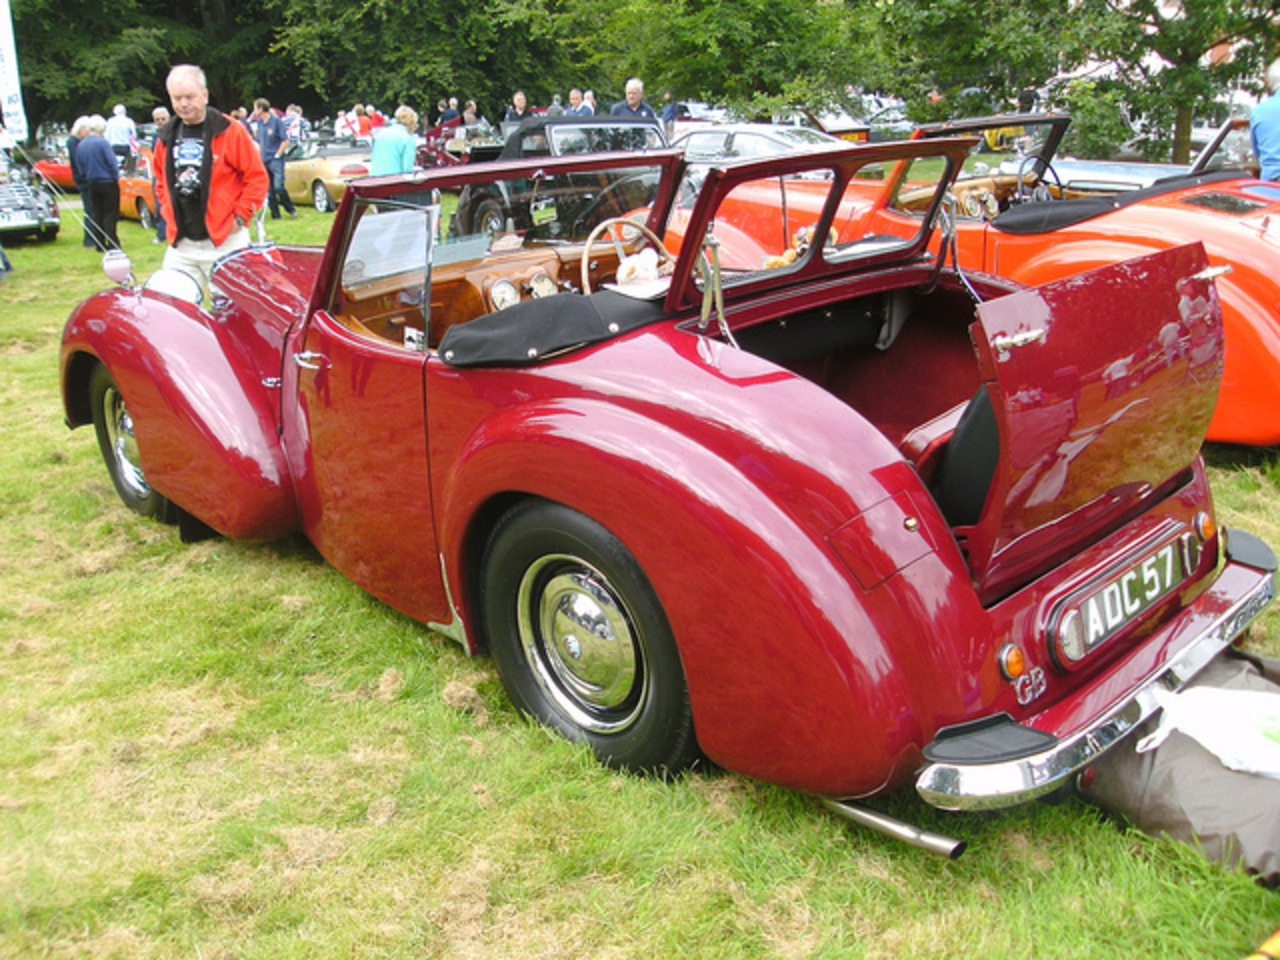 1948 Triumph 1800 Roadster | Flickr - Photo Sharing!